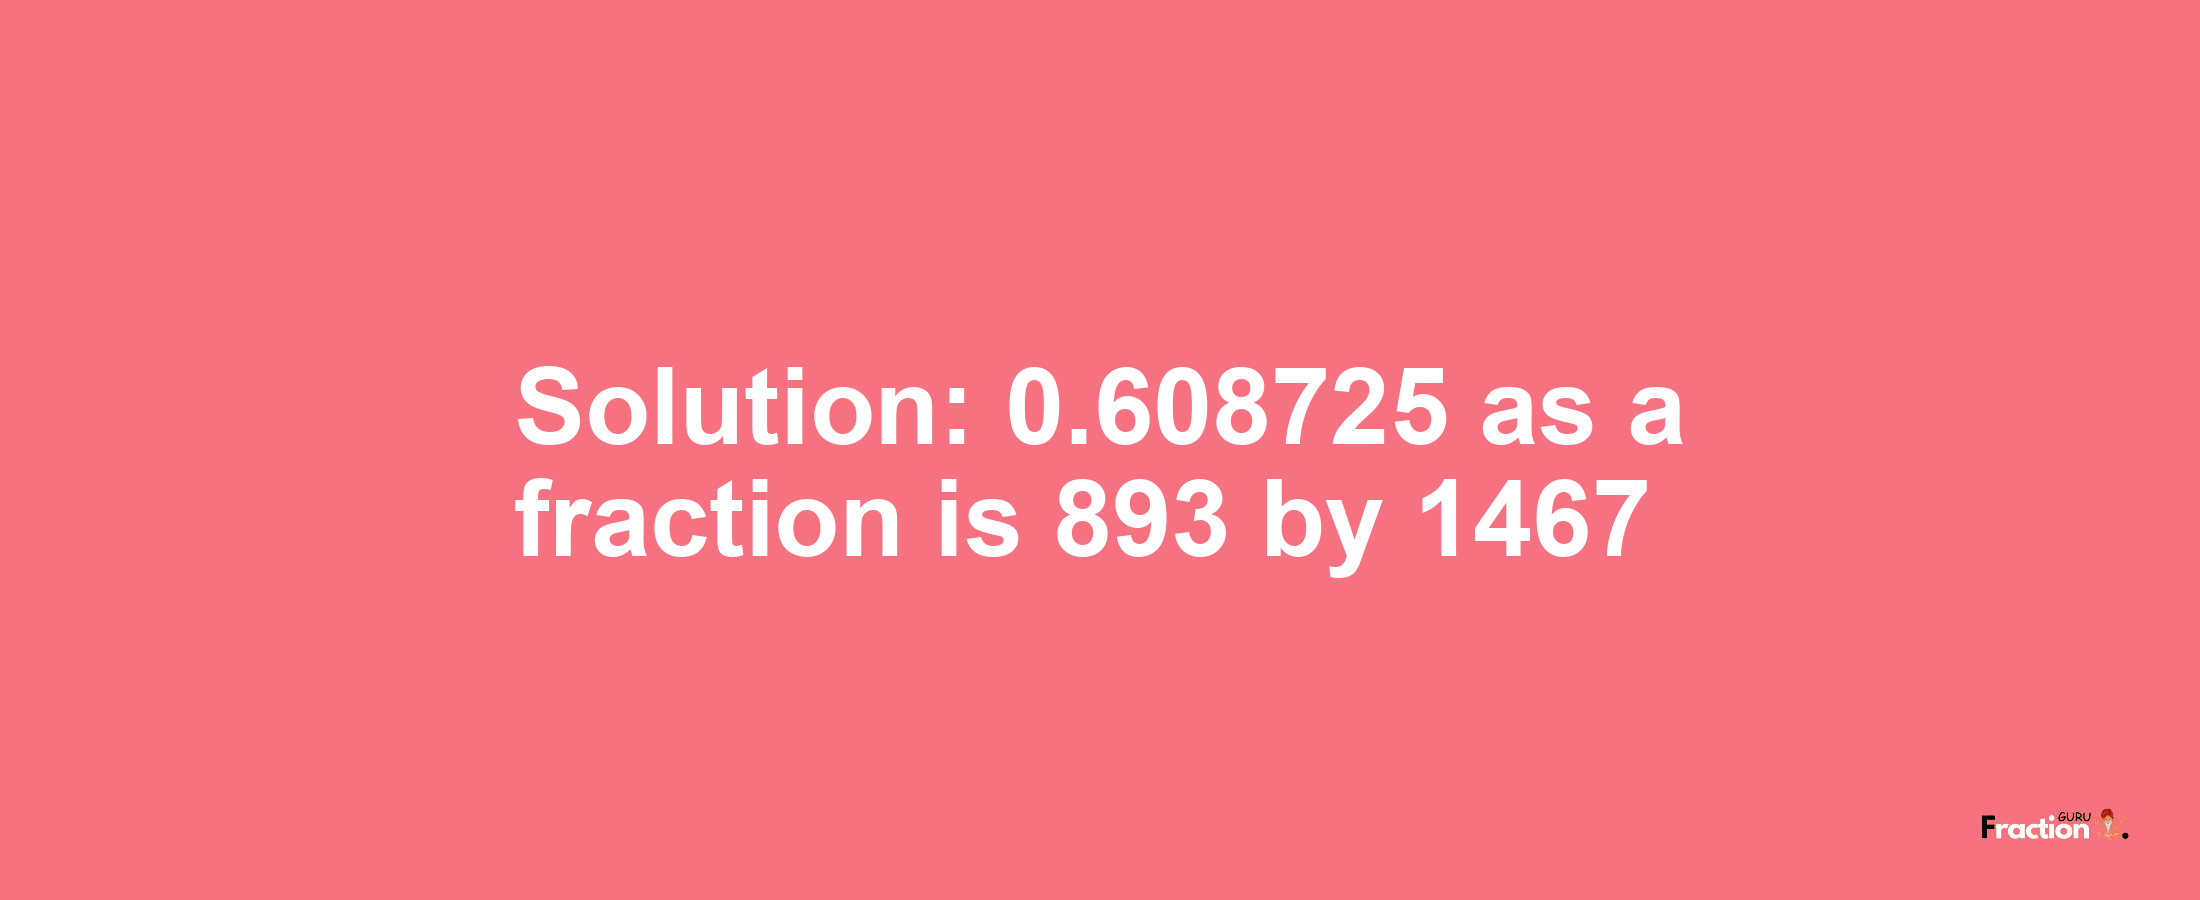 Solution:0.608725 as a fraction is 893/1467